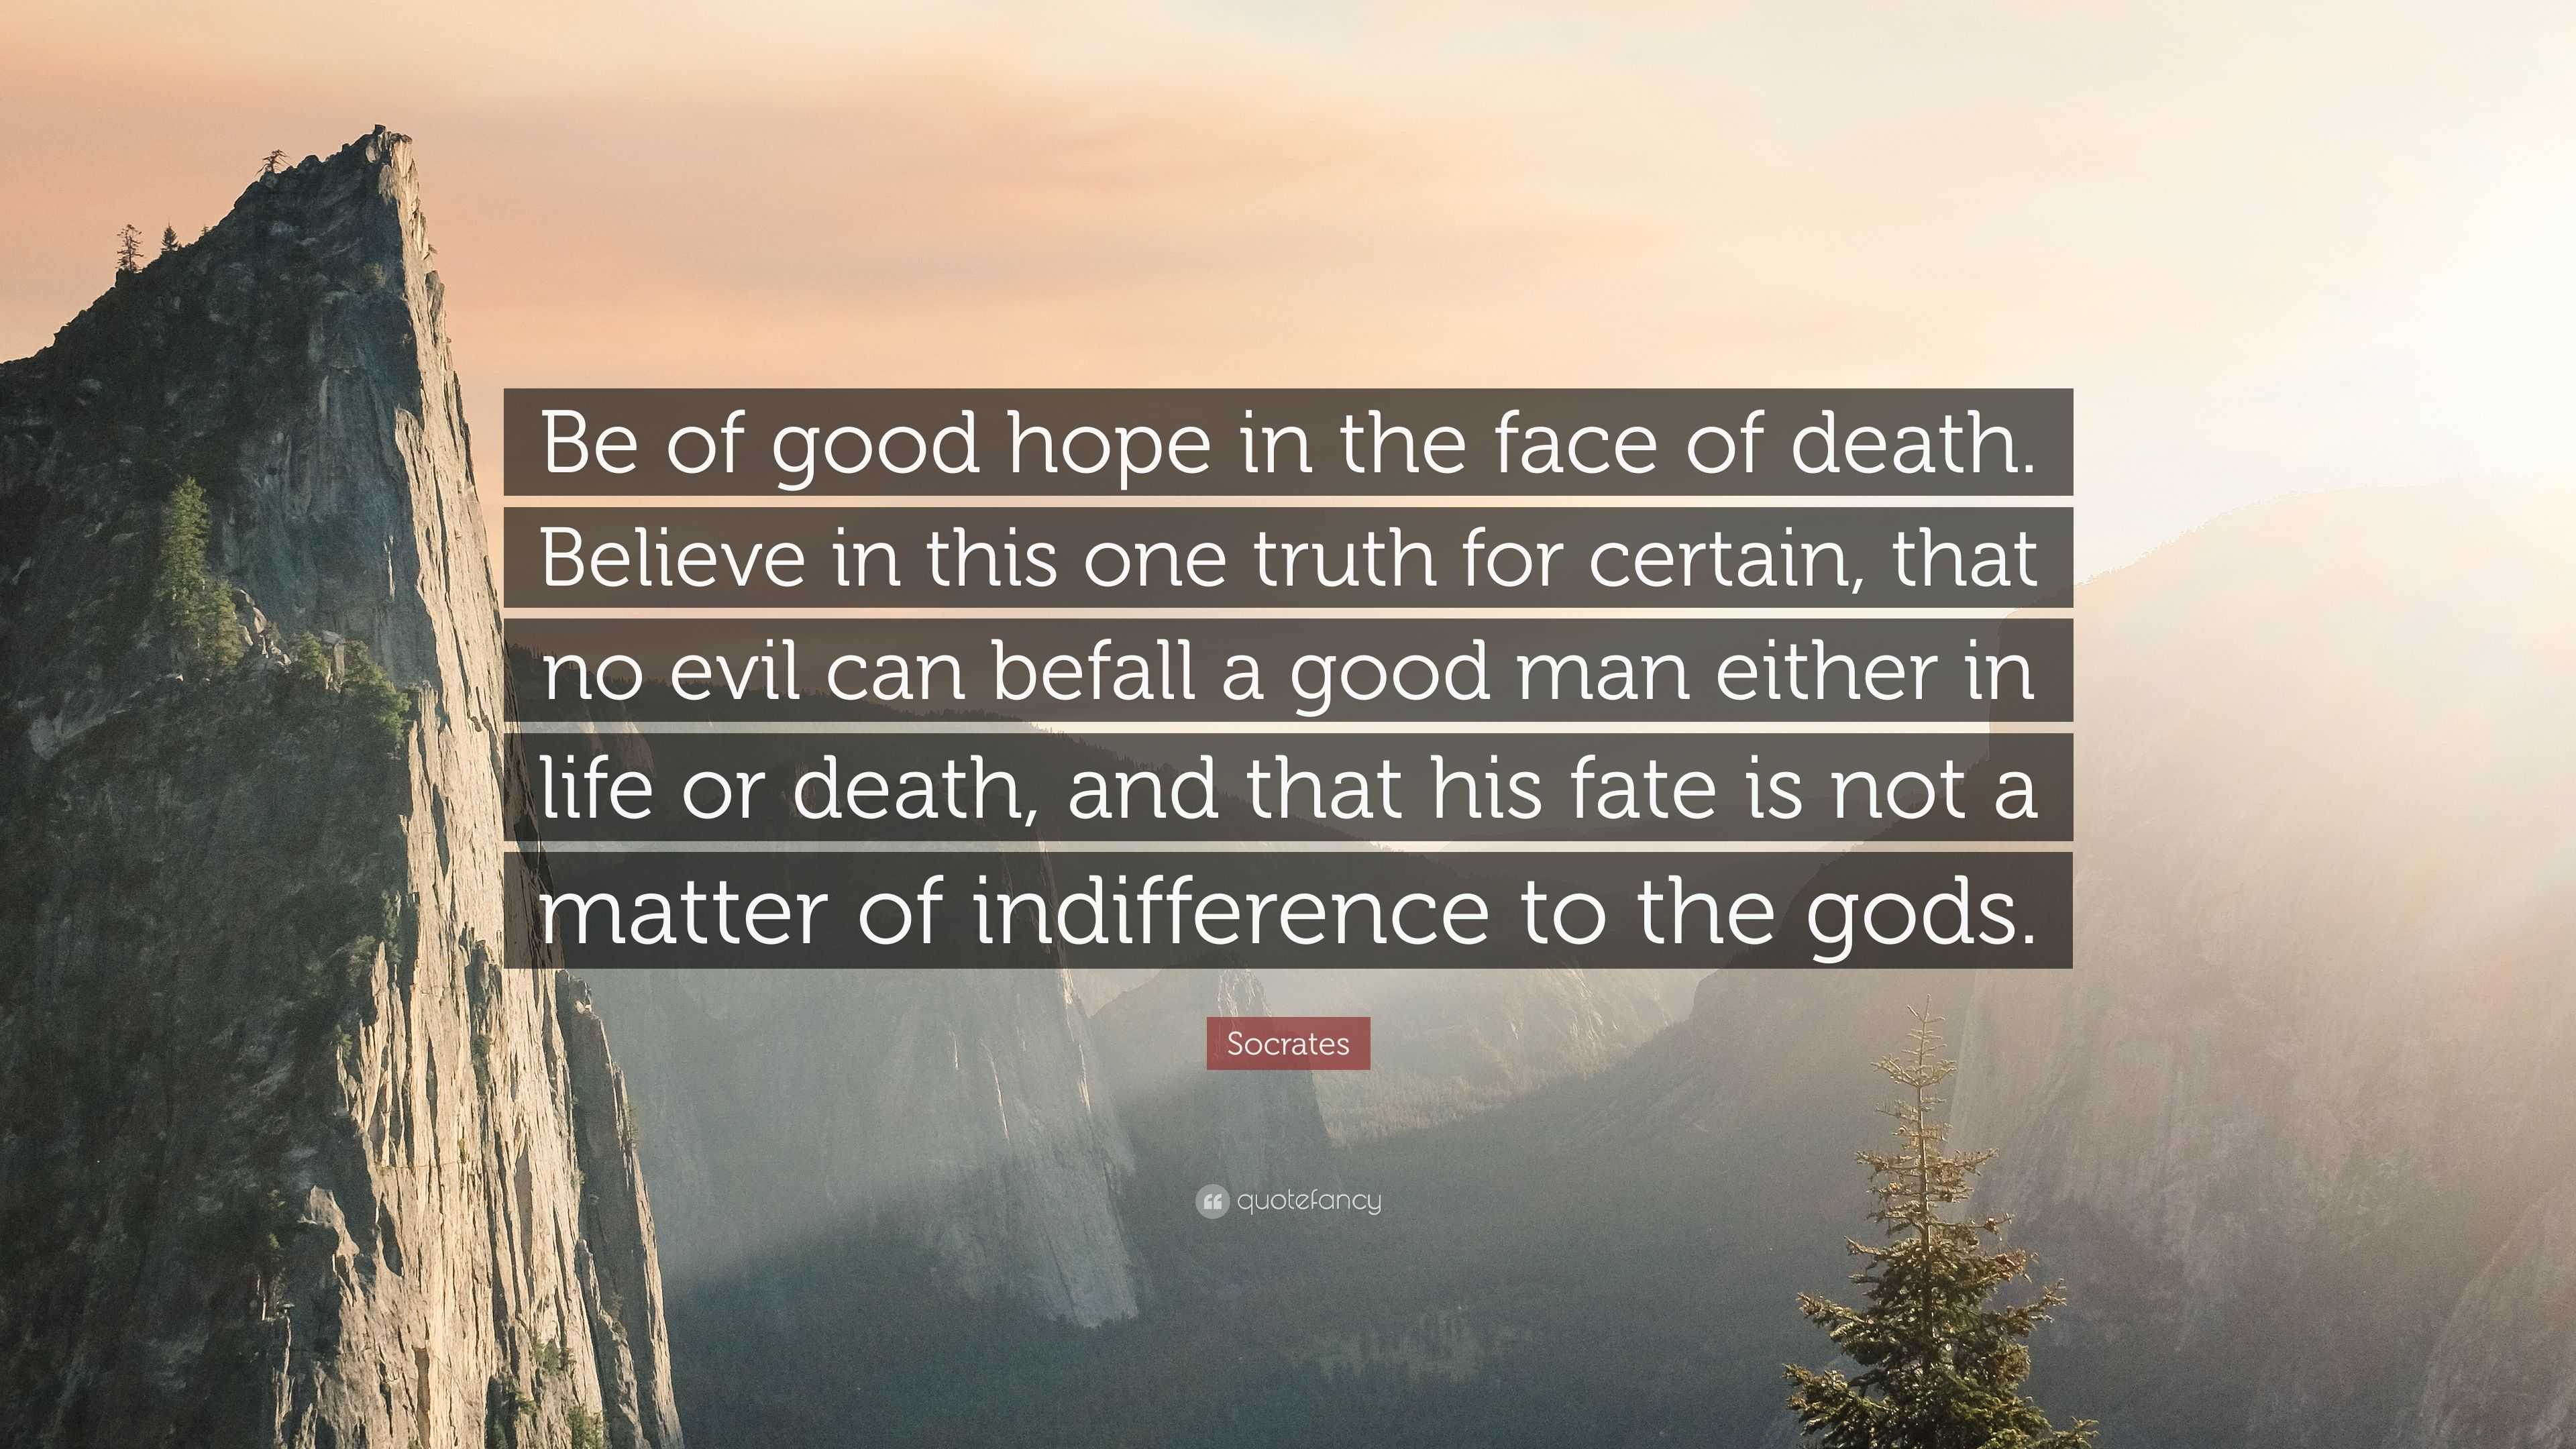 Socrates Quote “Be of good hope in the face of Believe in